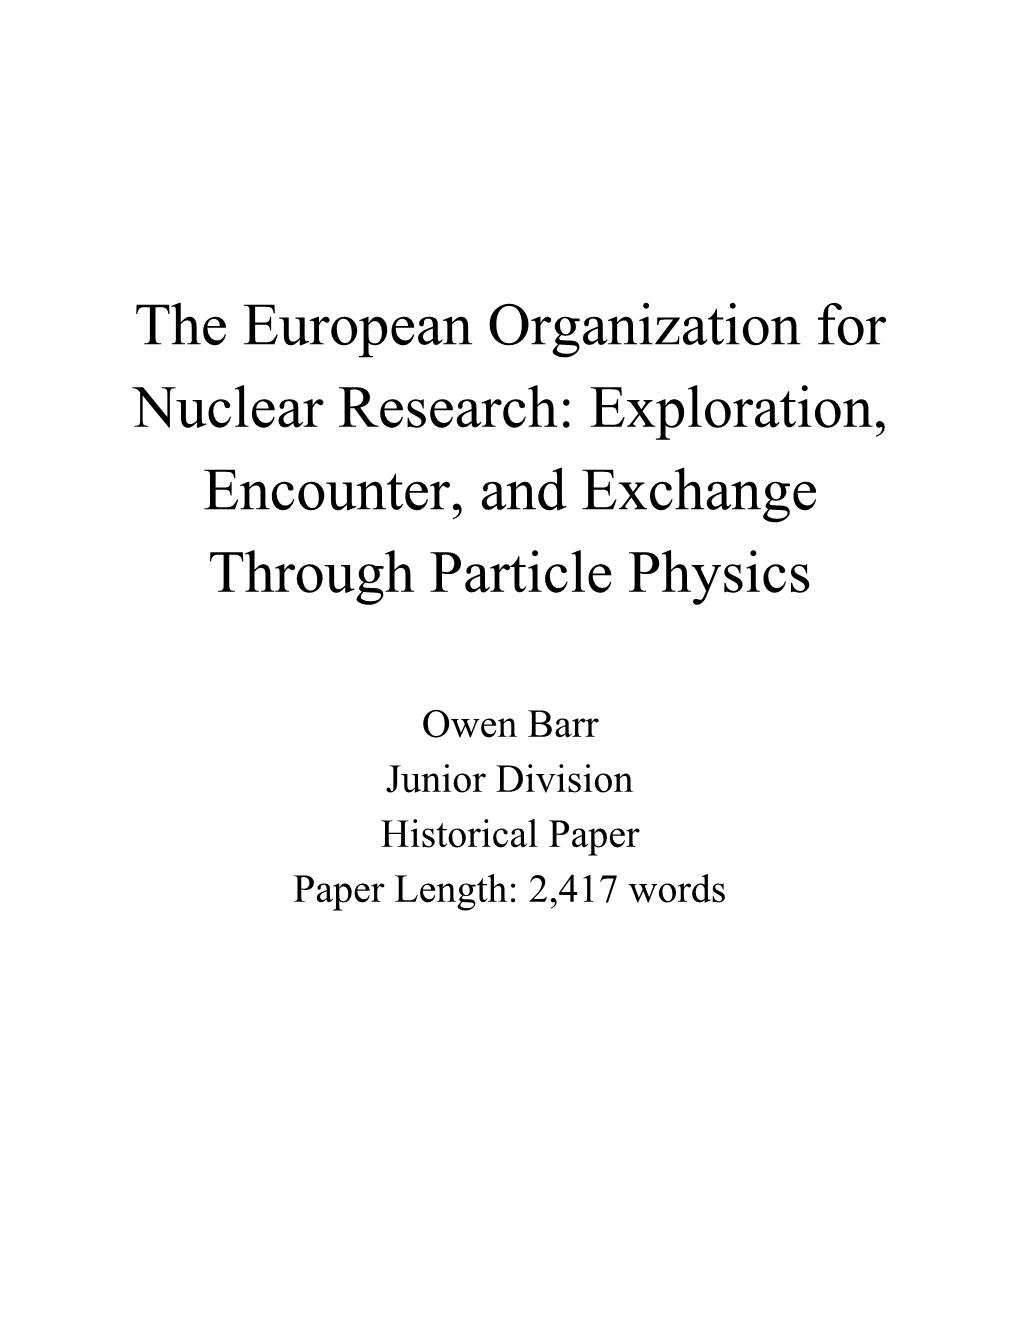 Exploration, Encounter, and Exchange Through Particle Physics